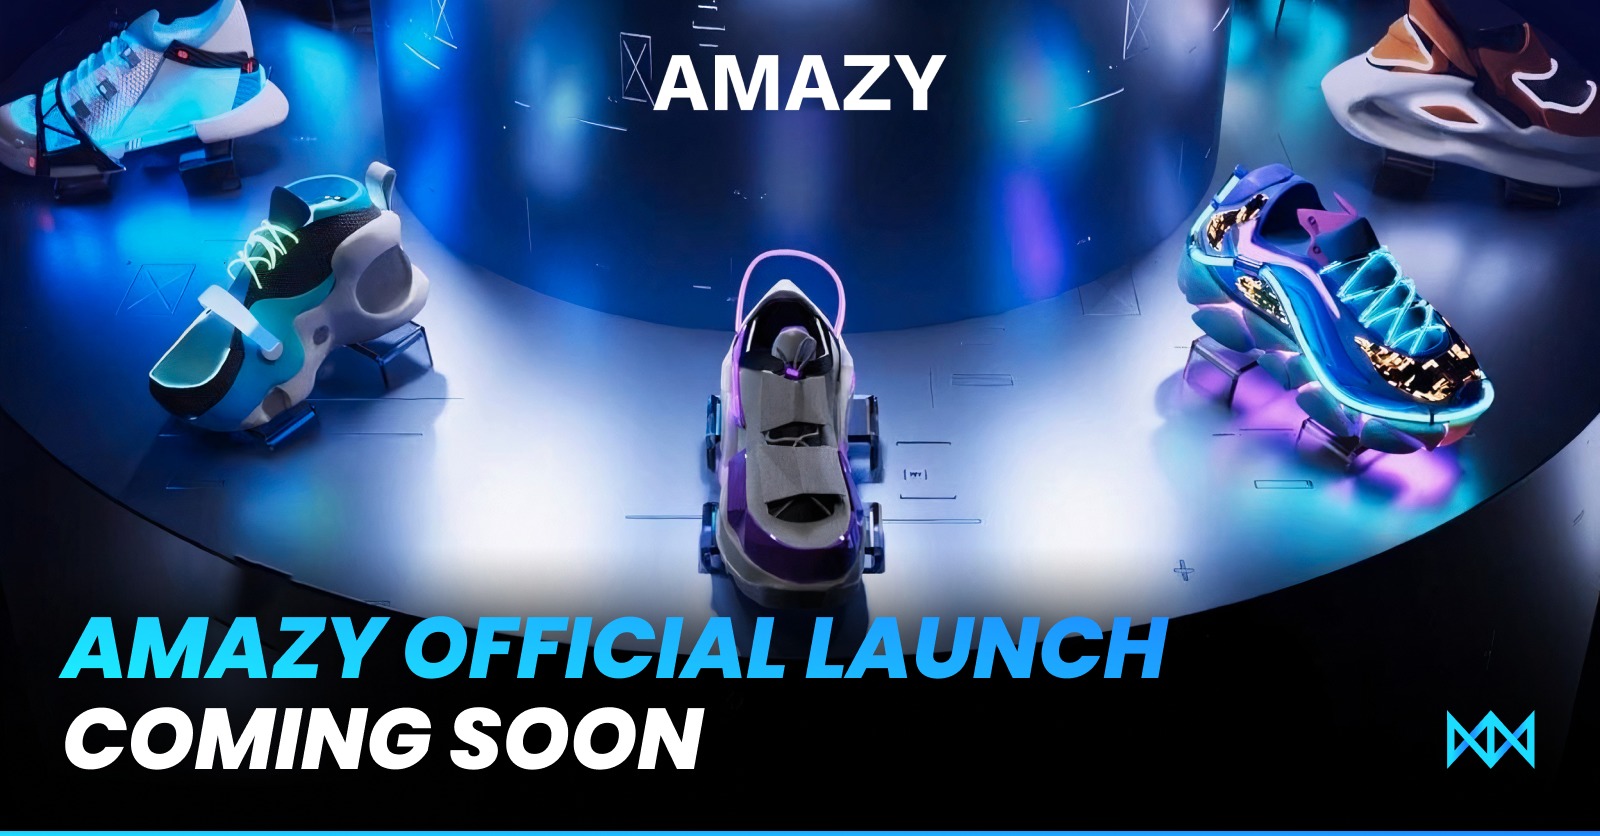 AMAZY is the Most Anticipated Web3 Project Launch of 2022